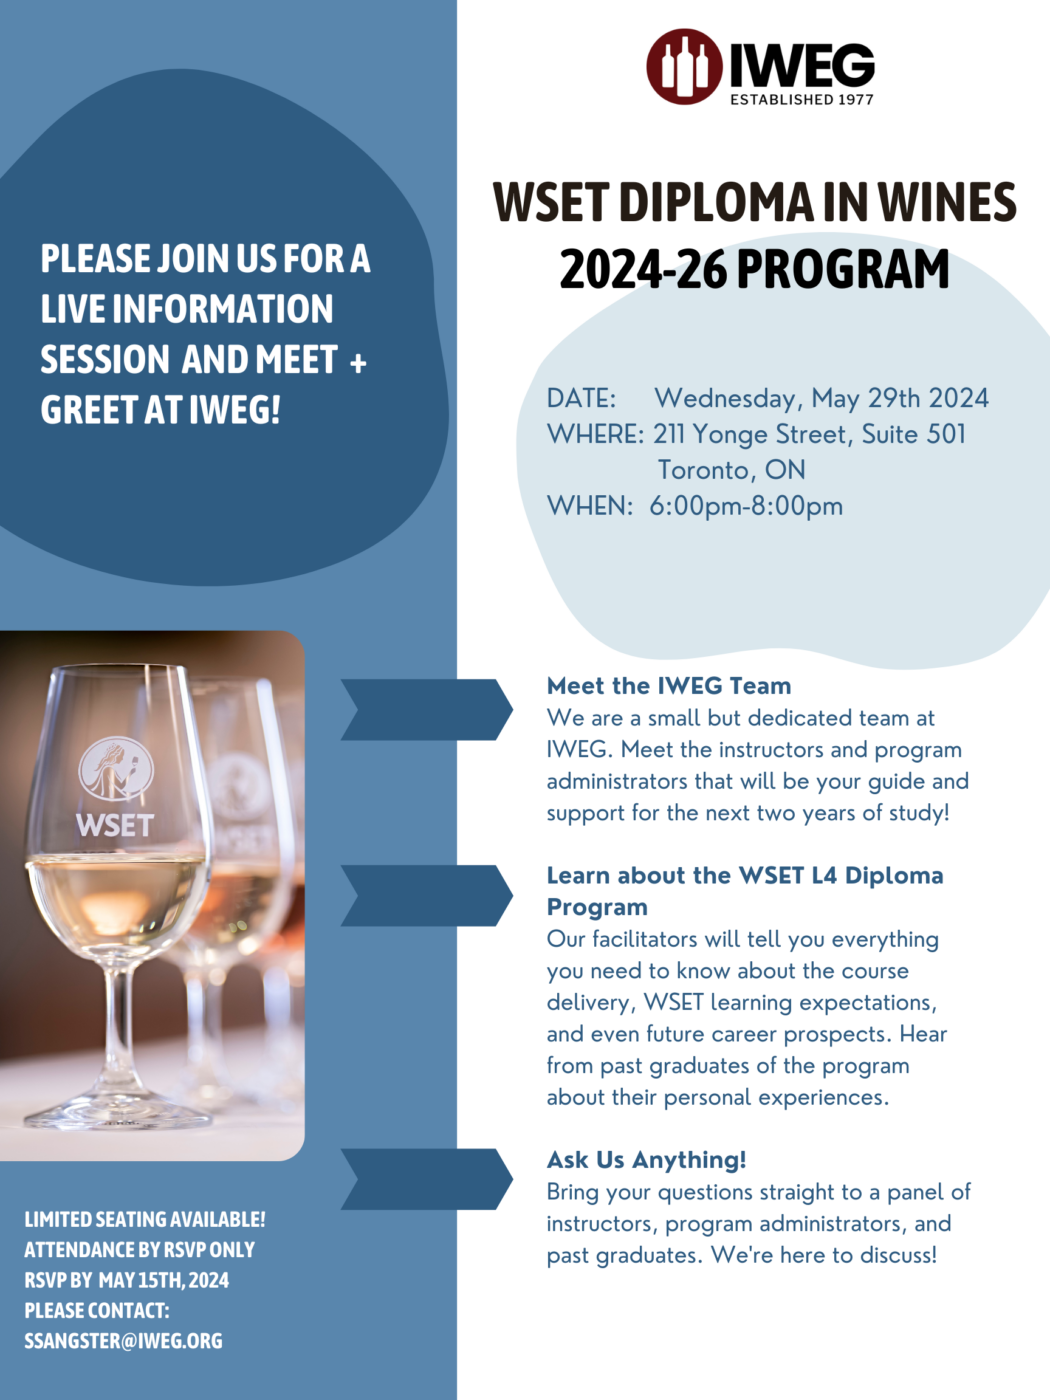 Are you thinking about pursuing the WSET Level 4 Diploma in Wines? Please join us for a live information session and meeting and greet at IWEG! The information session will take place on Wednesday, May 29th at 6pm - 8pm. RSVP by May 15th to ssangster@iweg.org. Learn more about the WSET Level 4 Diploma in Wines.